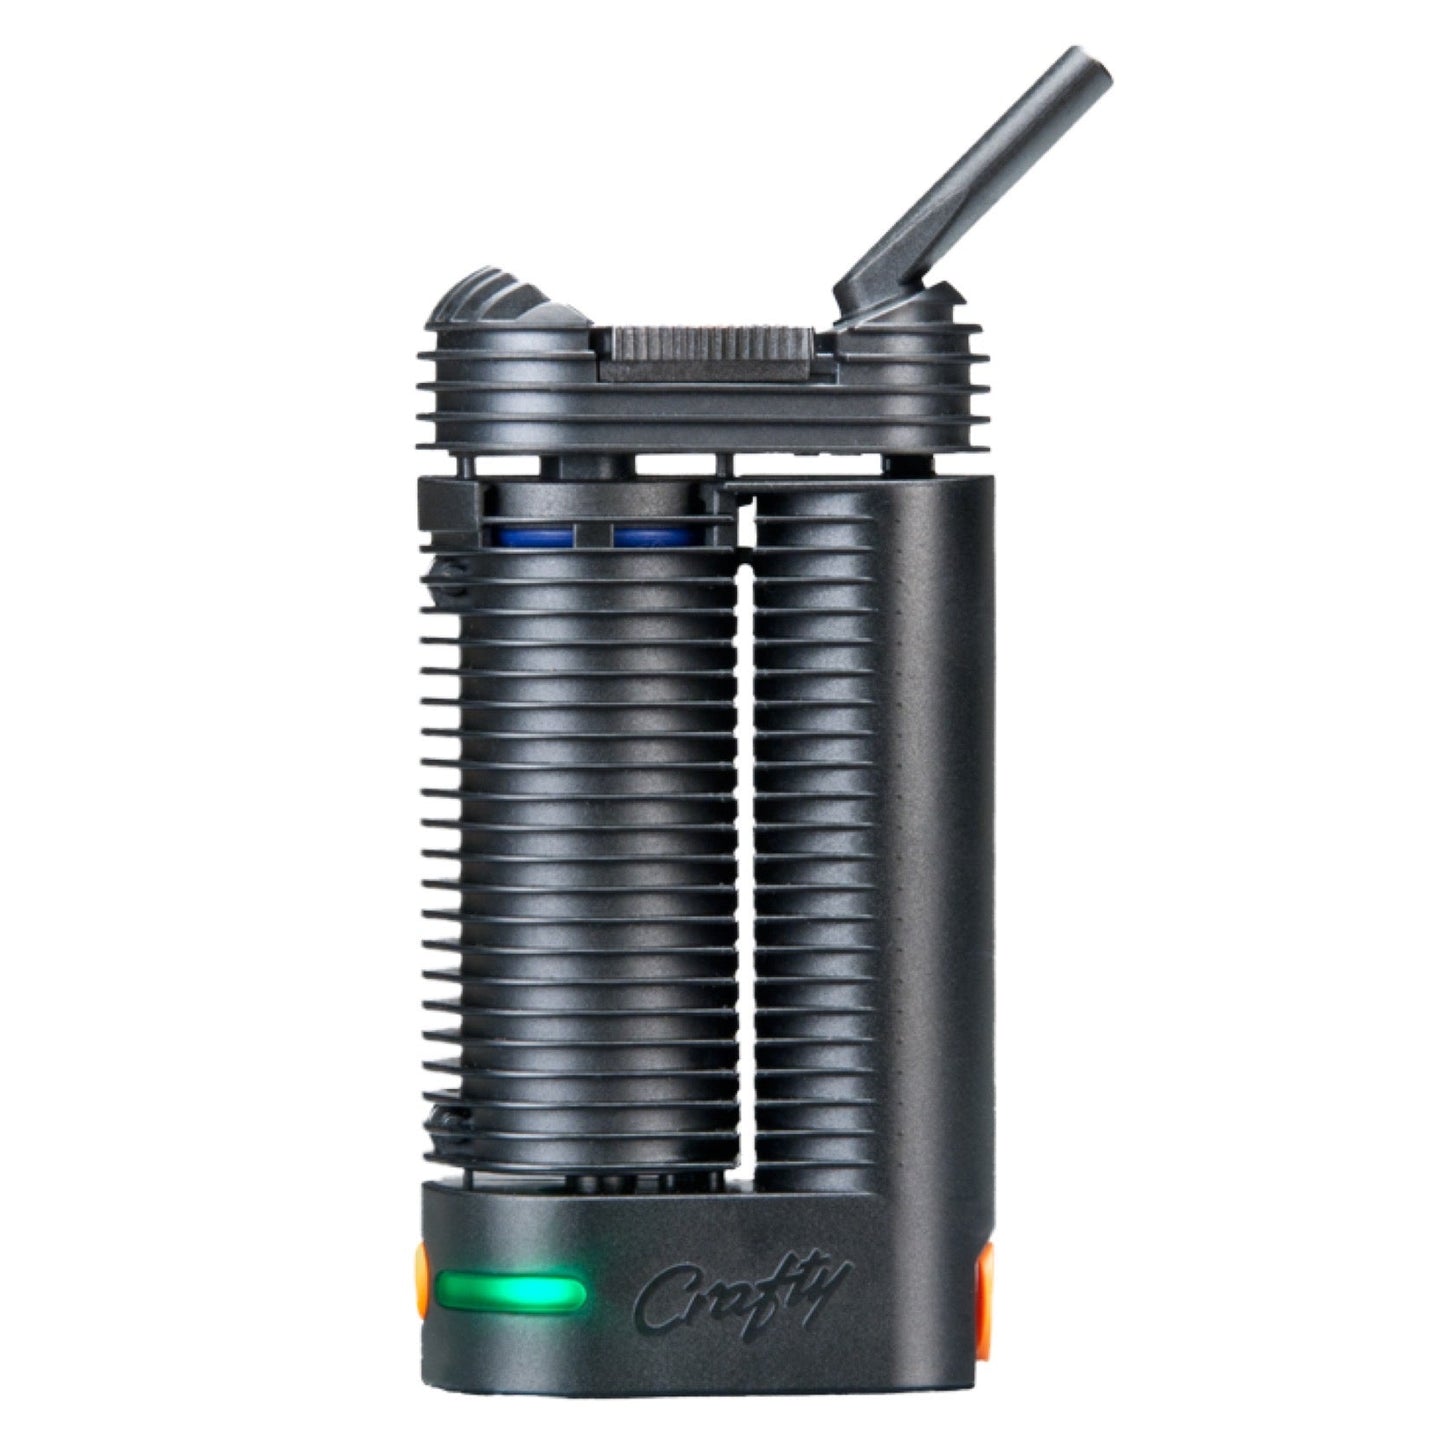 The Crafty Vaporizer by Storz & Bickel 🍯🌿 - CaliConnected